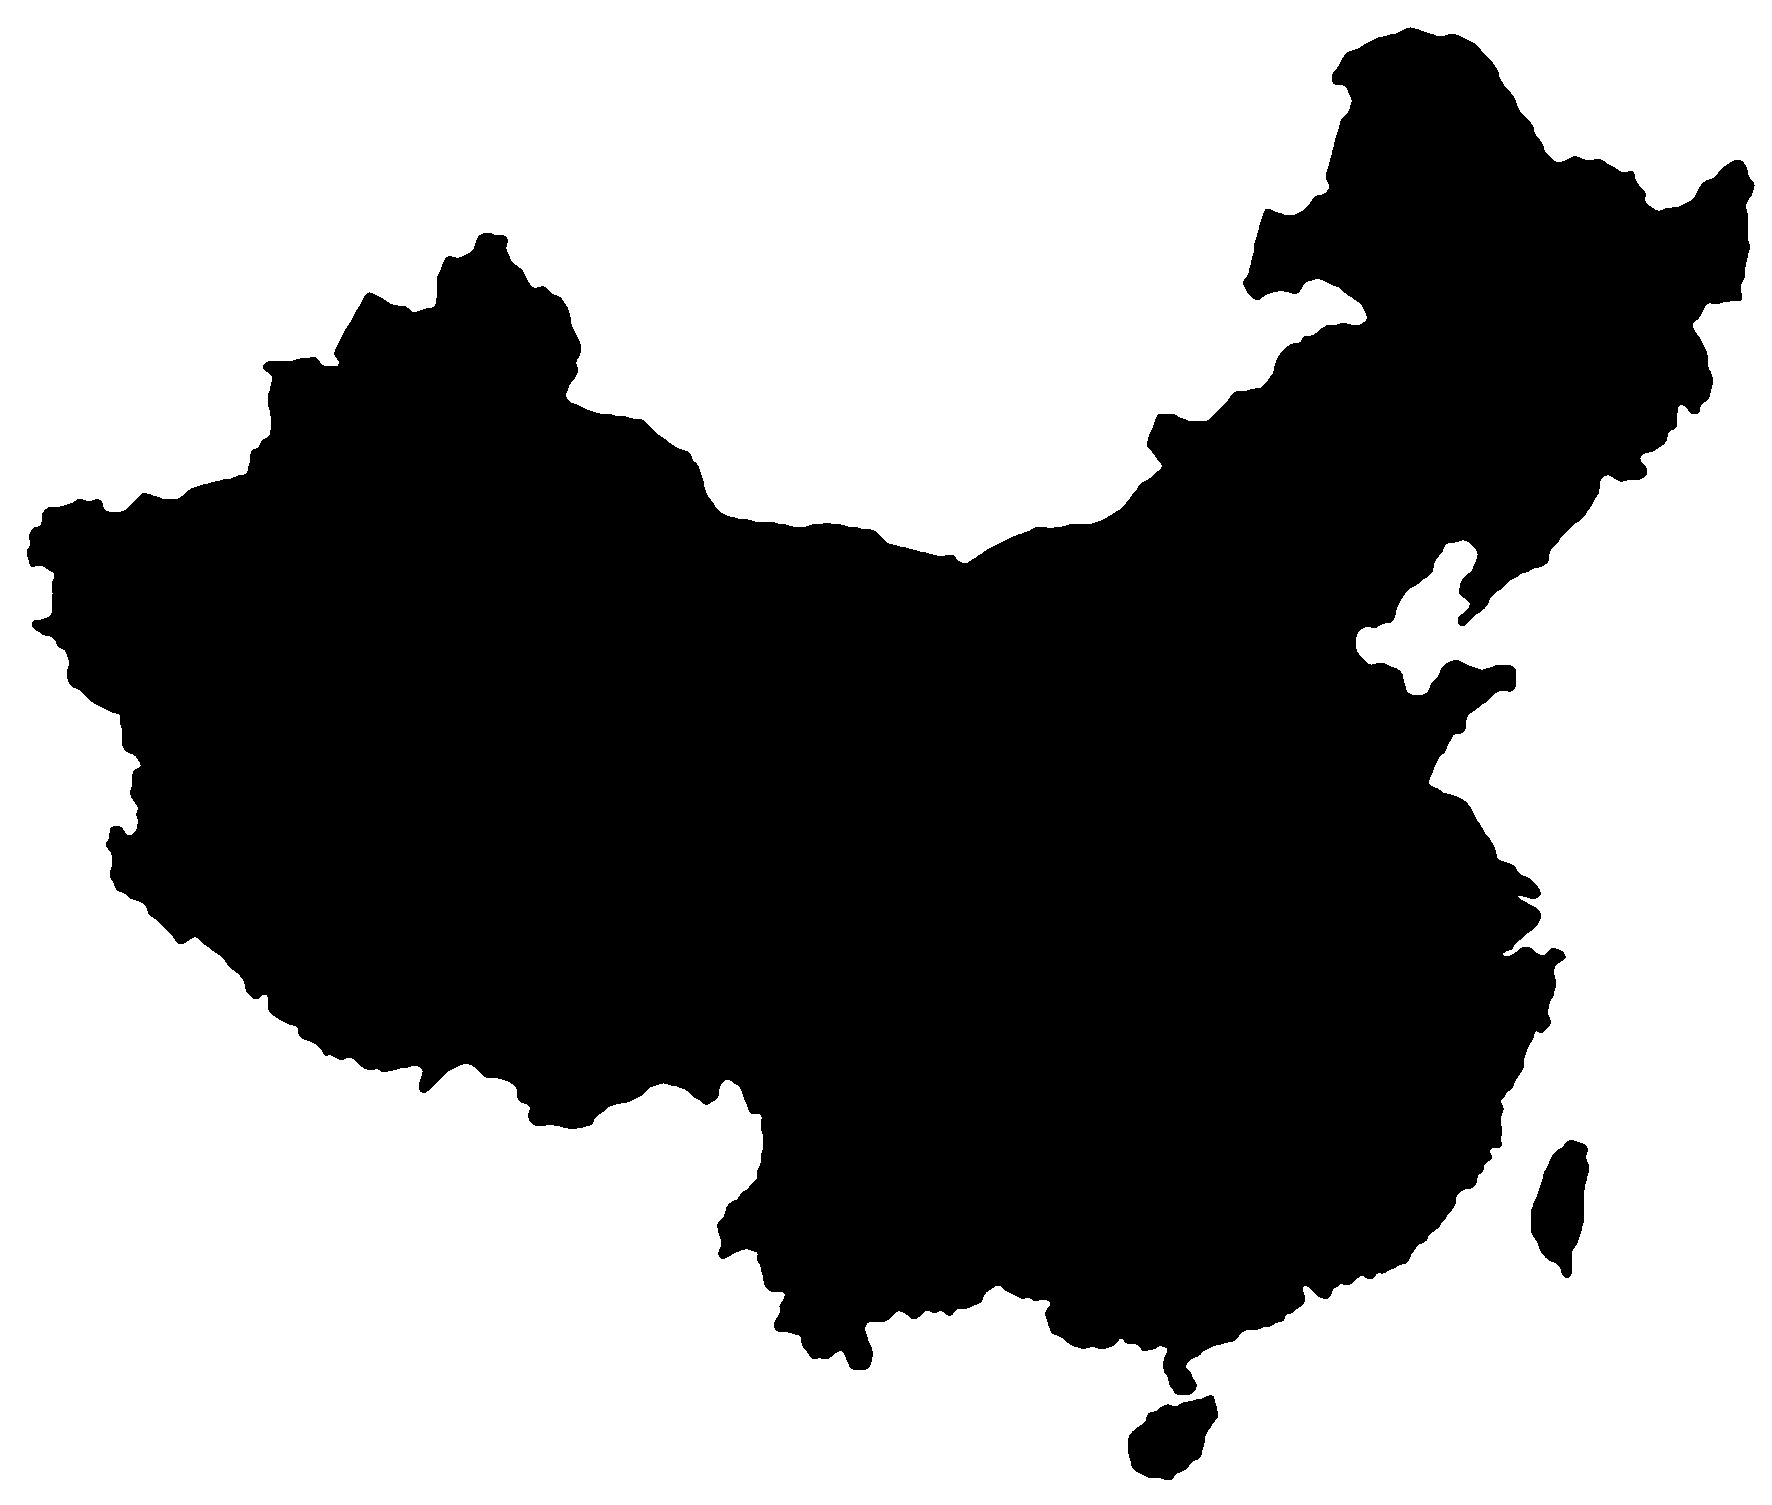 map of china silhouette